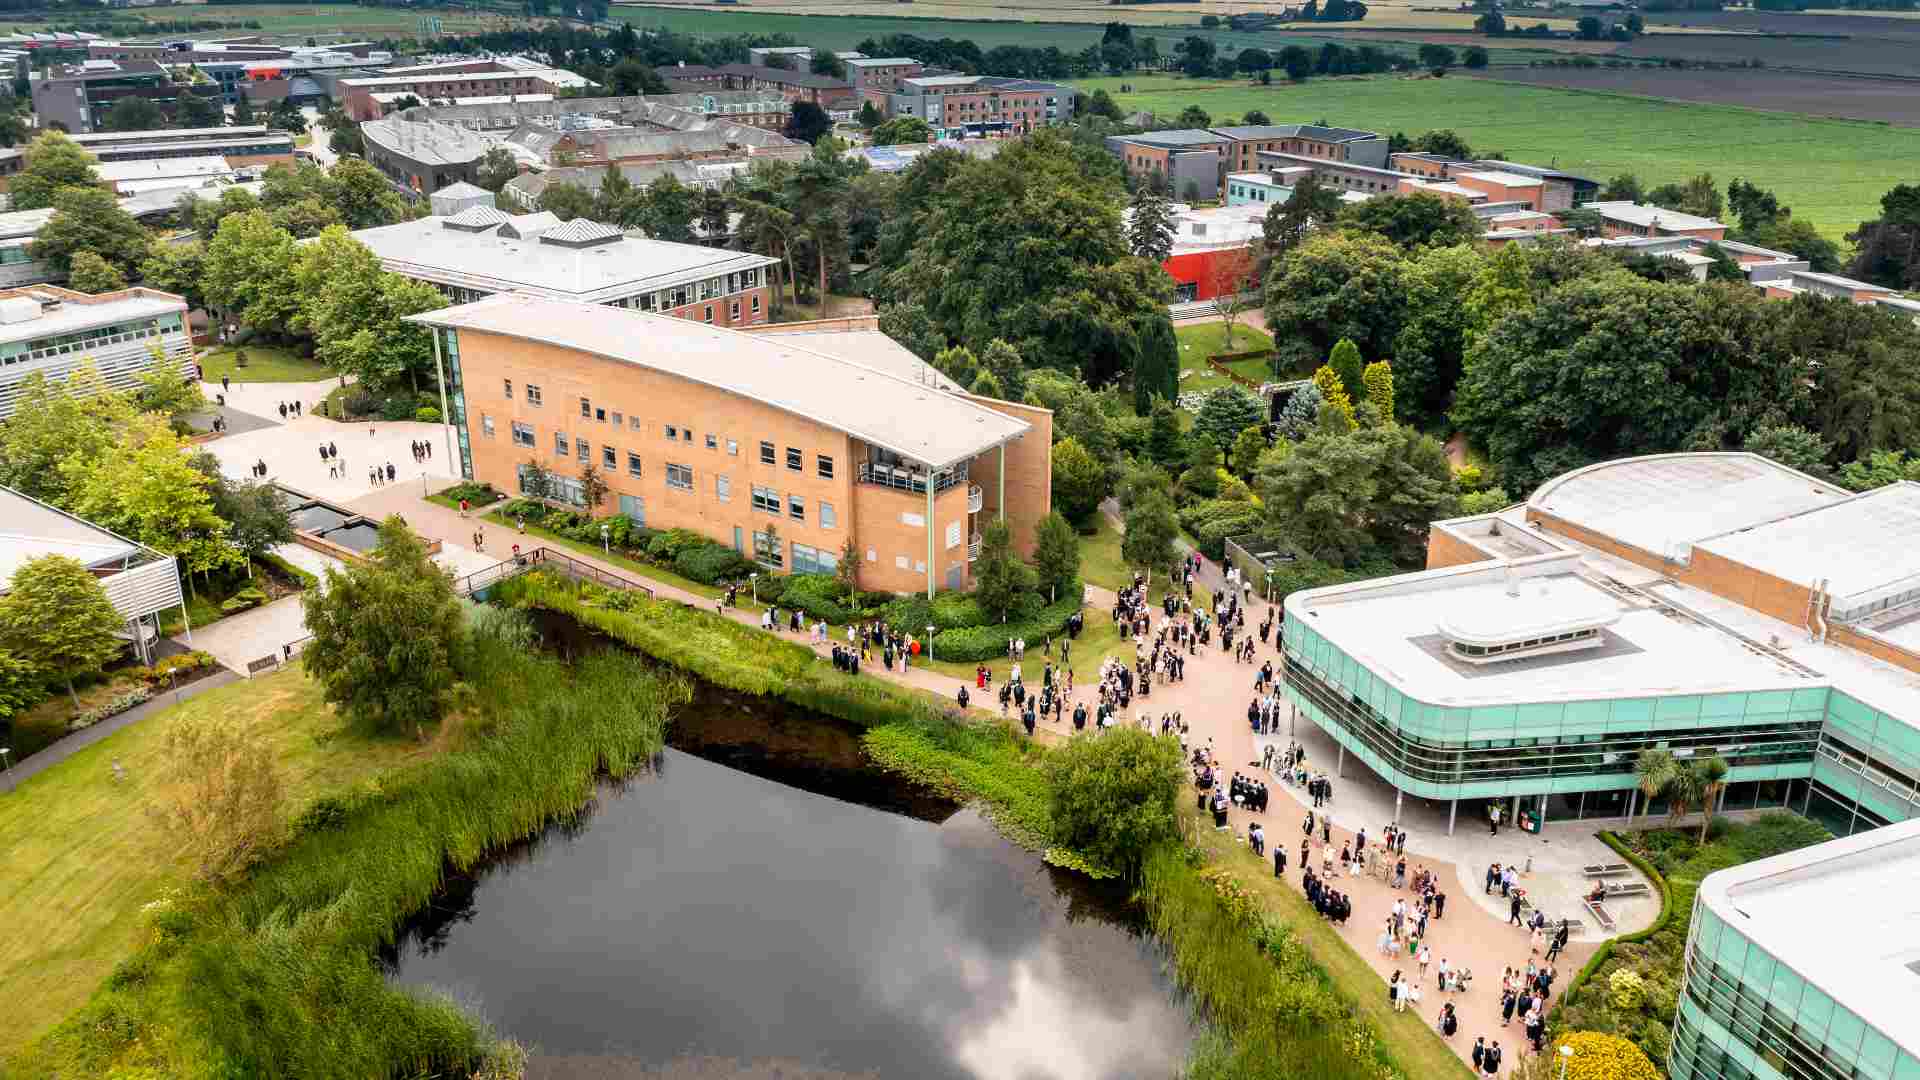 An aerial view of campus during graduation. The graduands are wearing their gowns ready to go into a ceremony.